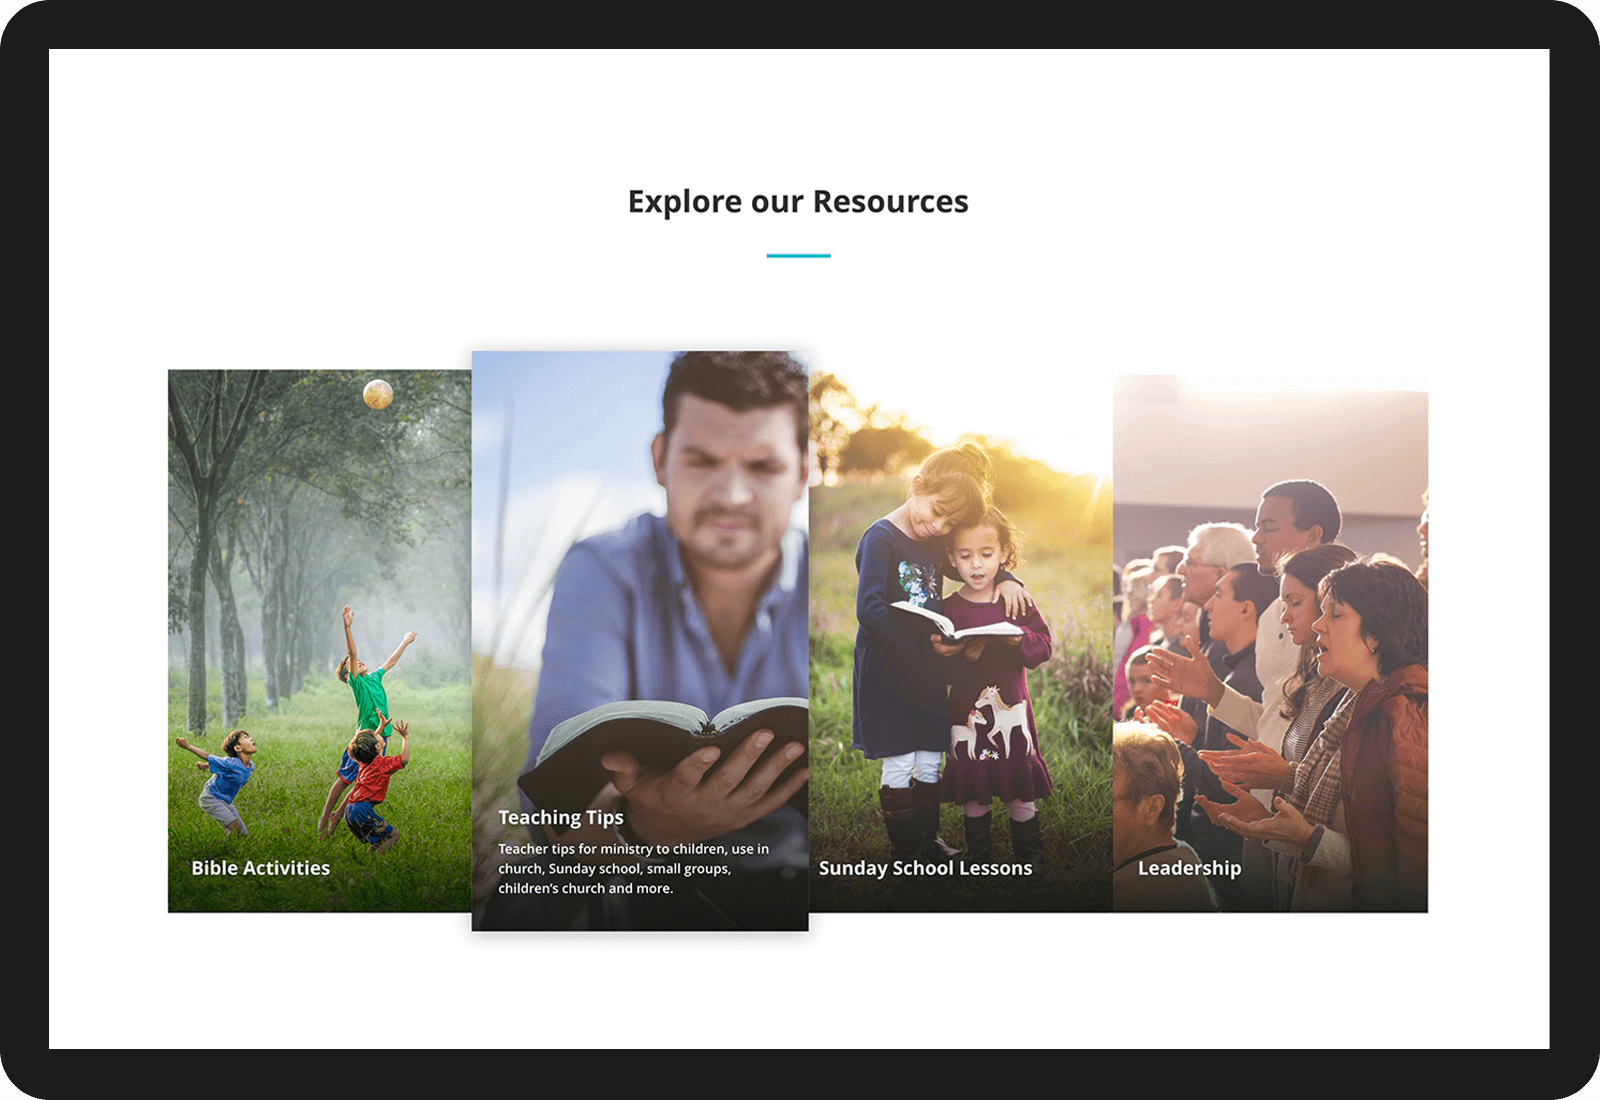 Children's Ministry - Explore our Resources